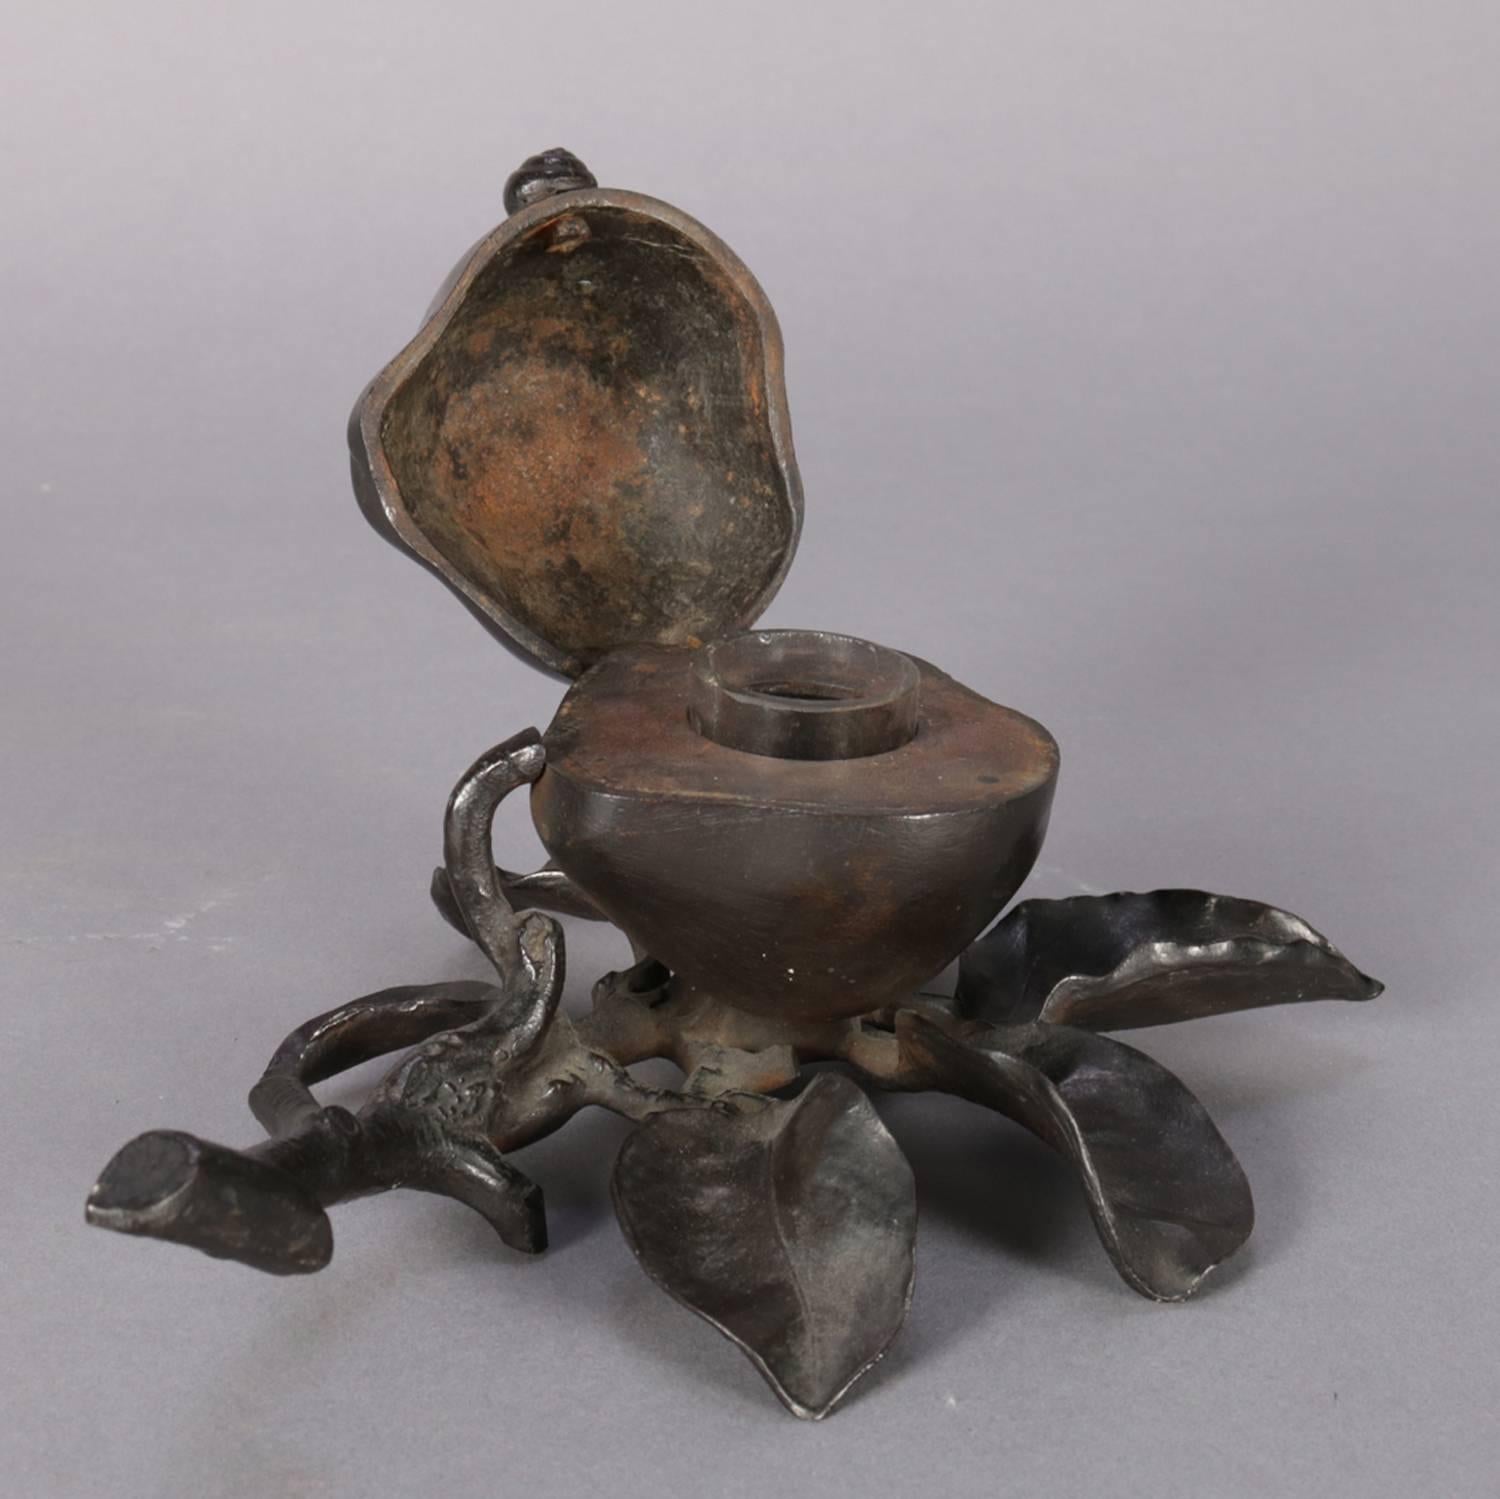 Antique cast metal figural fruit still life sculpture inkwell, pear form case opens with snail form handle to glass insert and is seated on branch and leaf form Stand, 19th century
 
***DELIVERY NOTICE – Due to COVID-19 we are employing NO-CONTACT